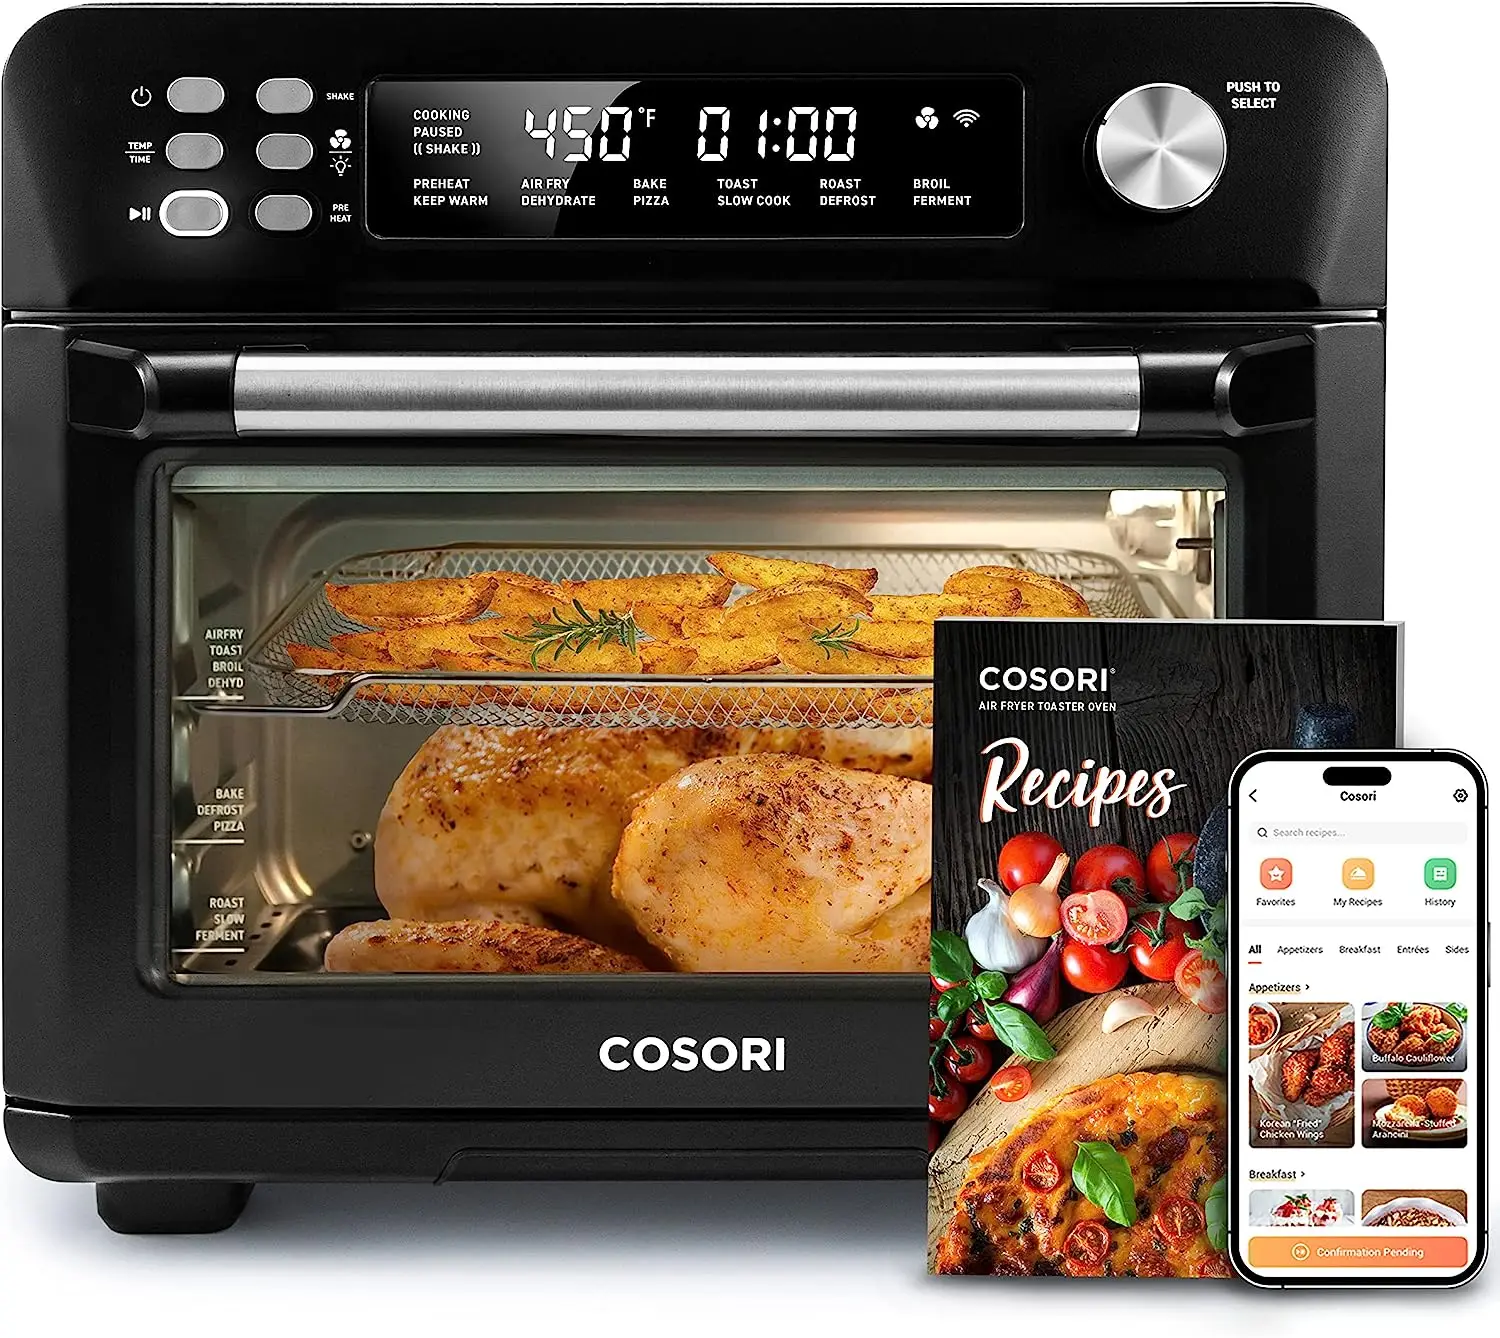 

COSORI Toaster Oven Air Fryer Combo, 12-in-1, 26QT Convection Oven Countertop,6 Slice Toast, 12'' Pizza, 75 Recipes&Accessories